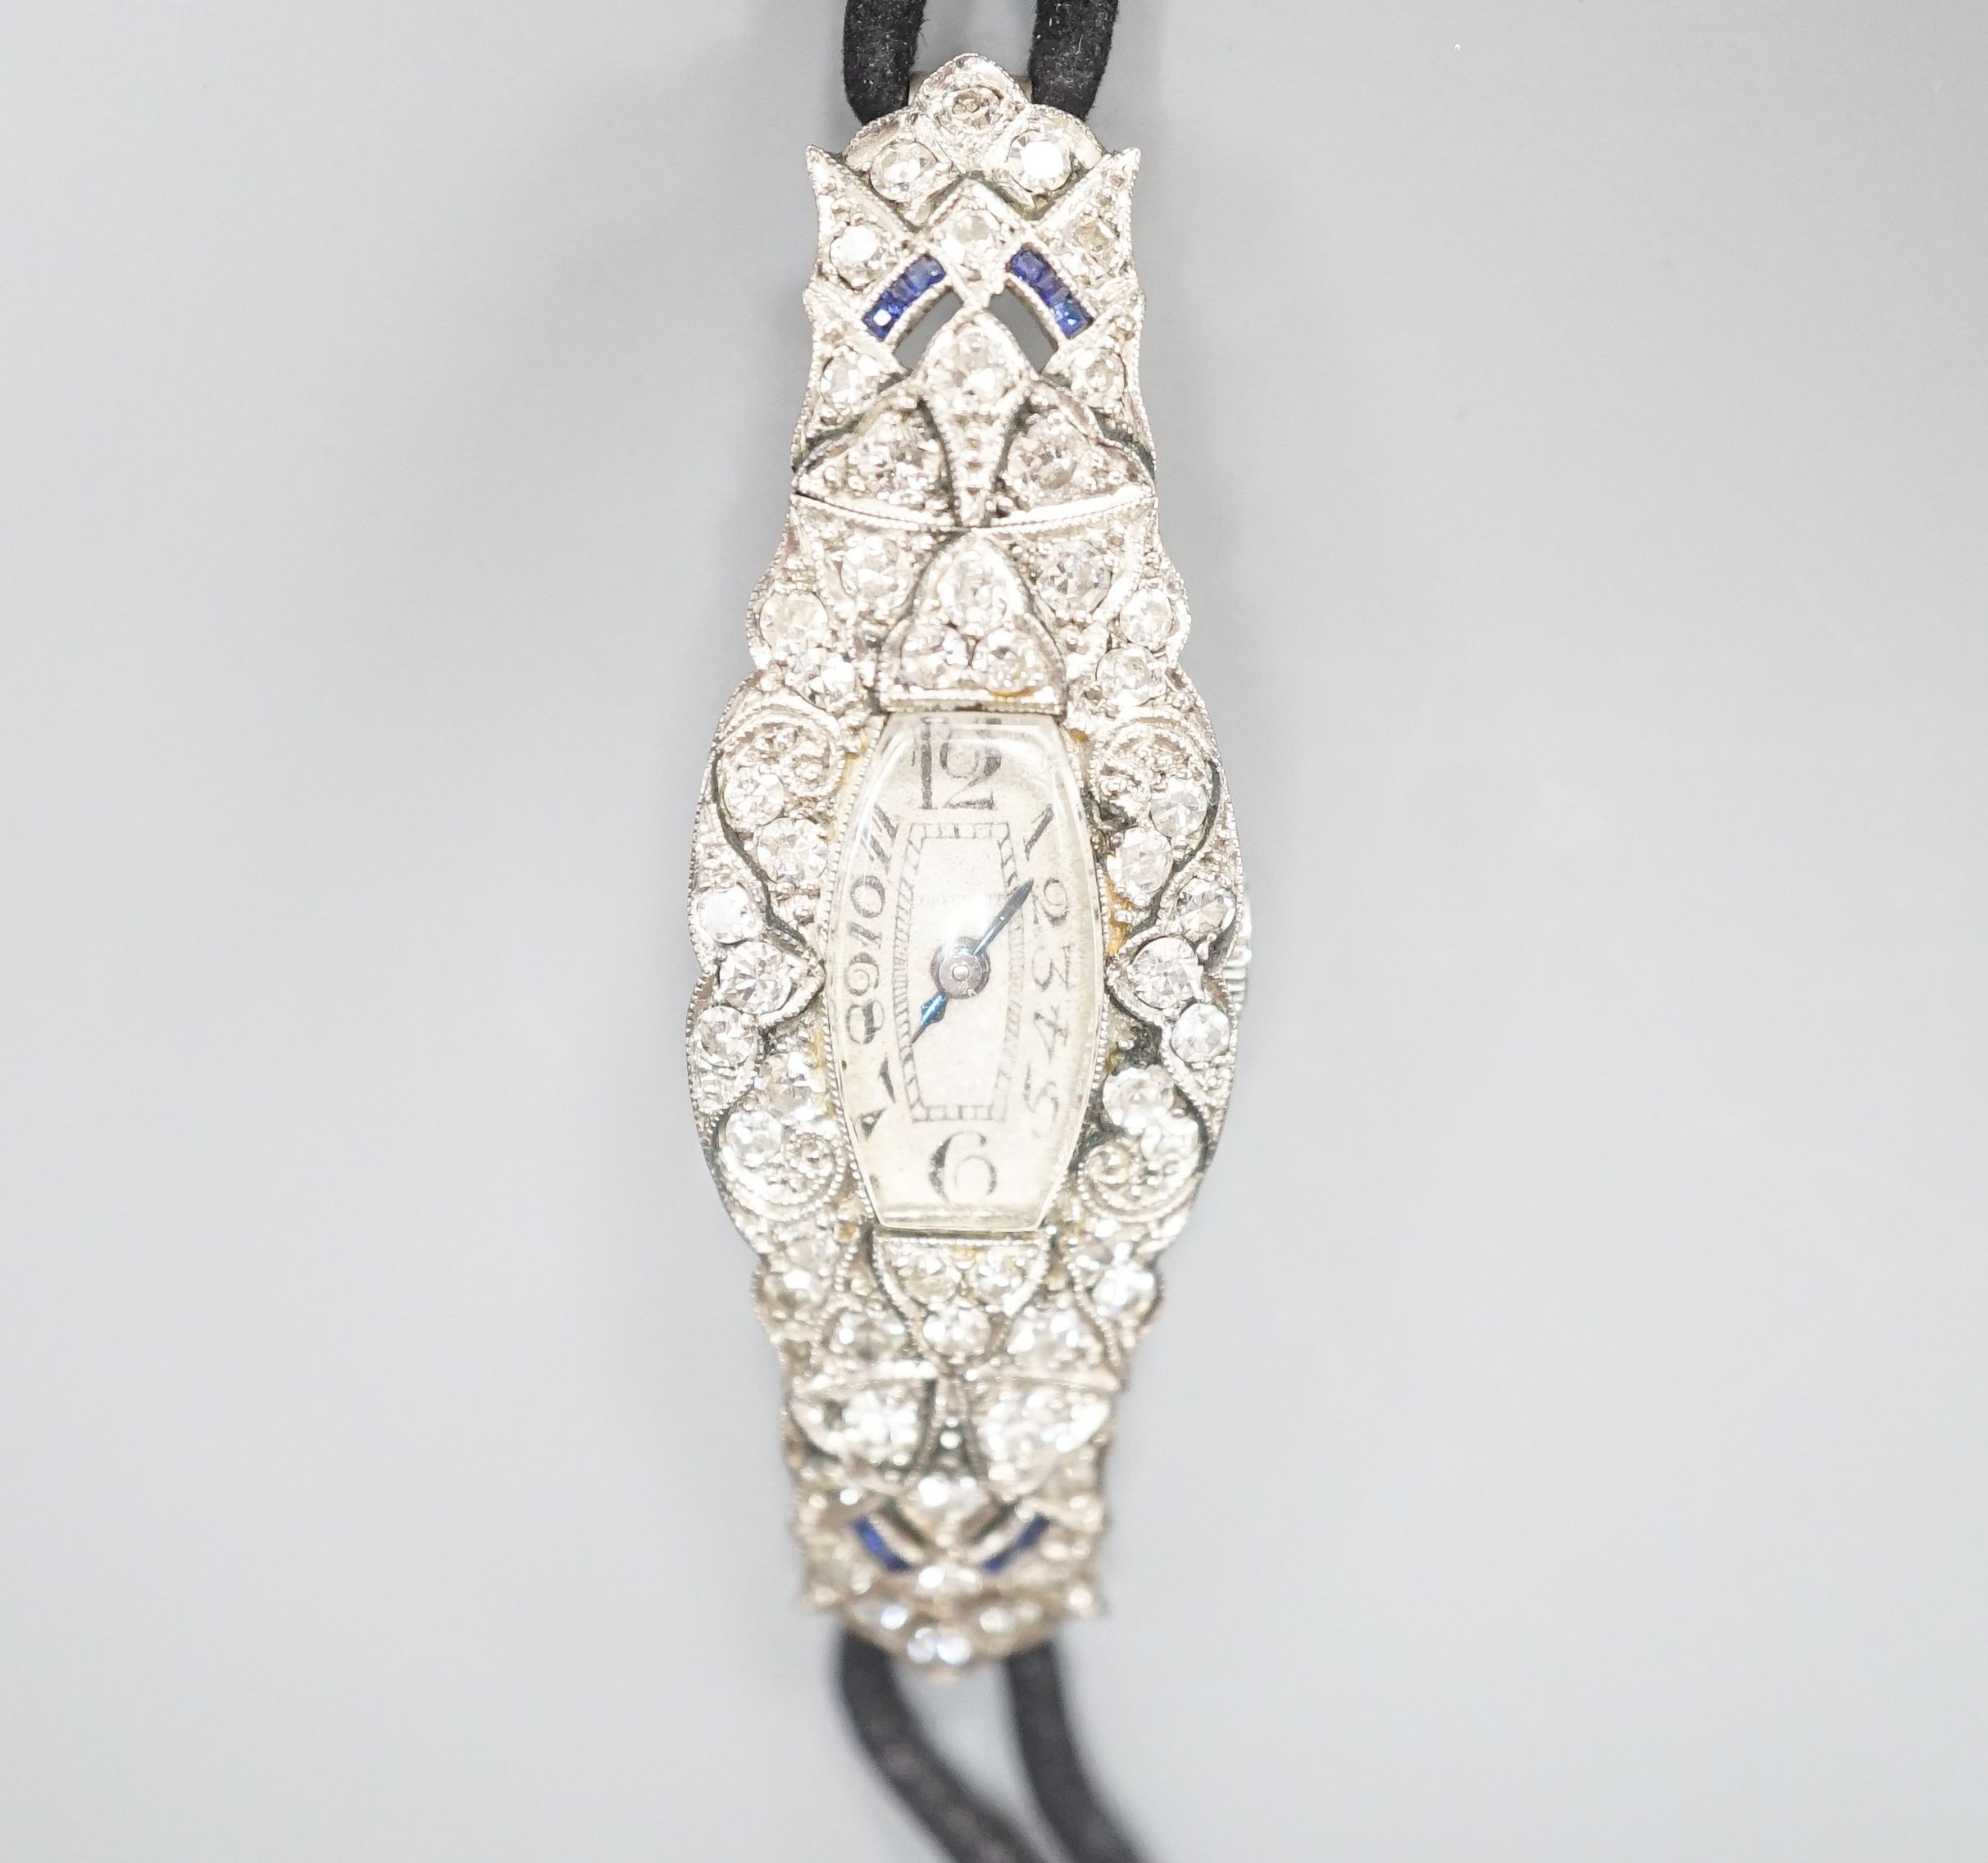 A lady's mid 20th century engraved white metal, diamond and sapphire set cocktail watch, case diameter 17mm, gross weight 18.3 grams, on a later? twin strand fabric strap.